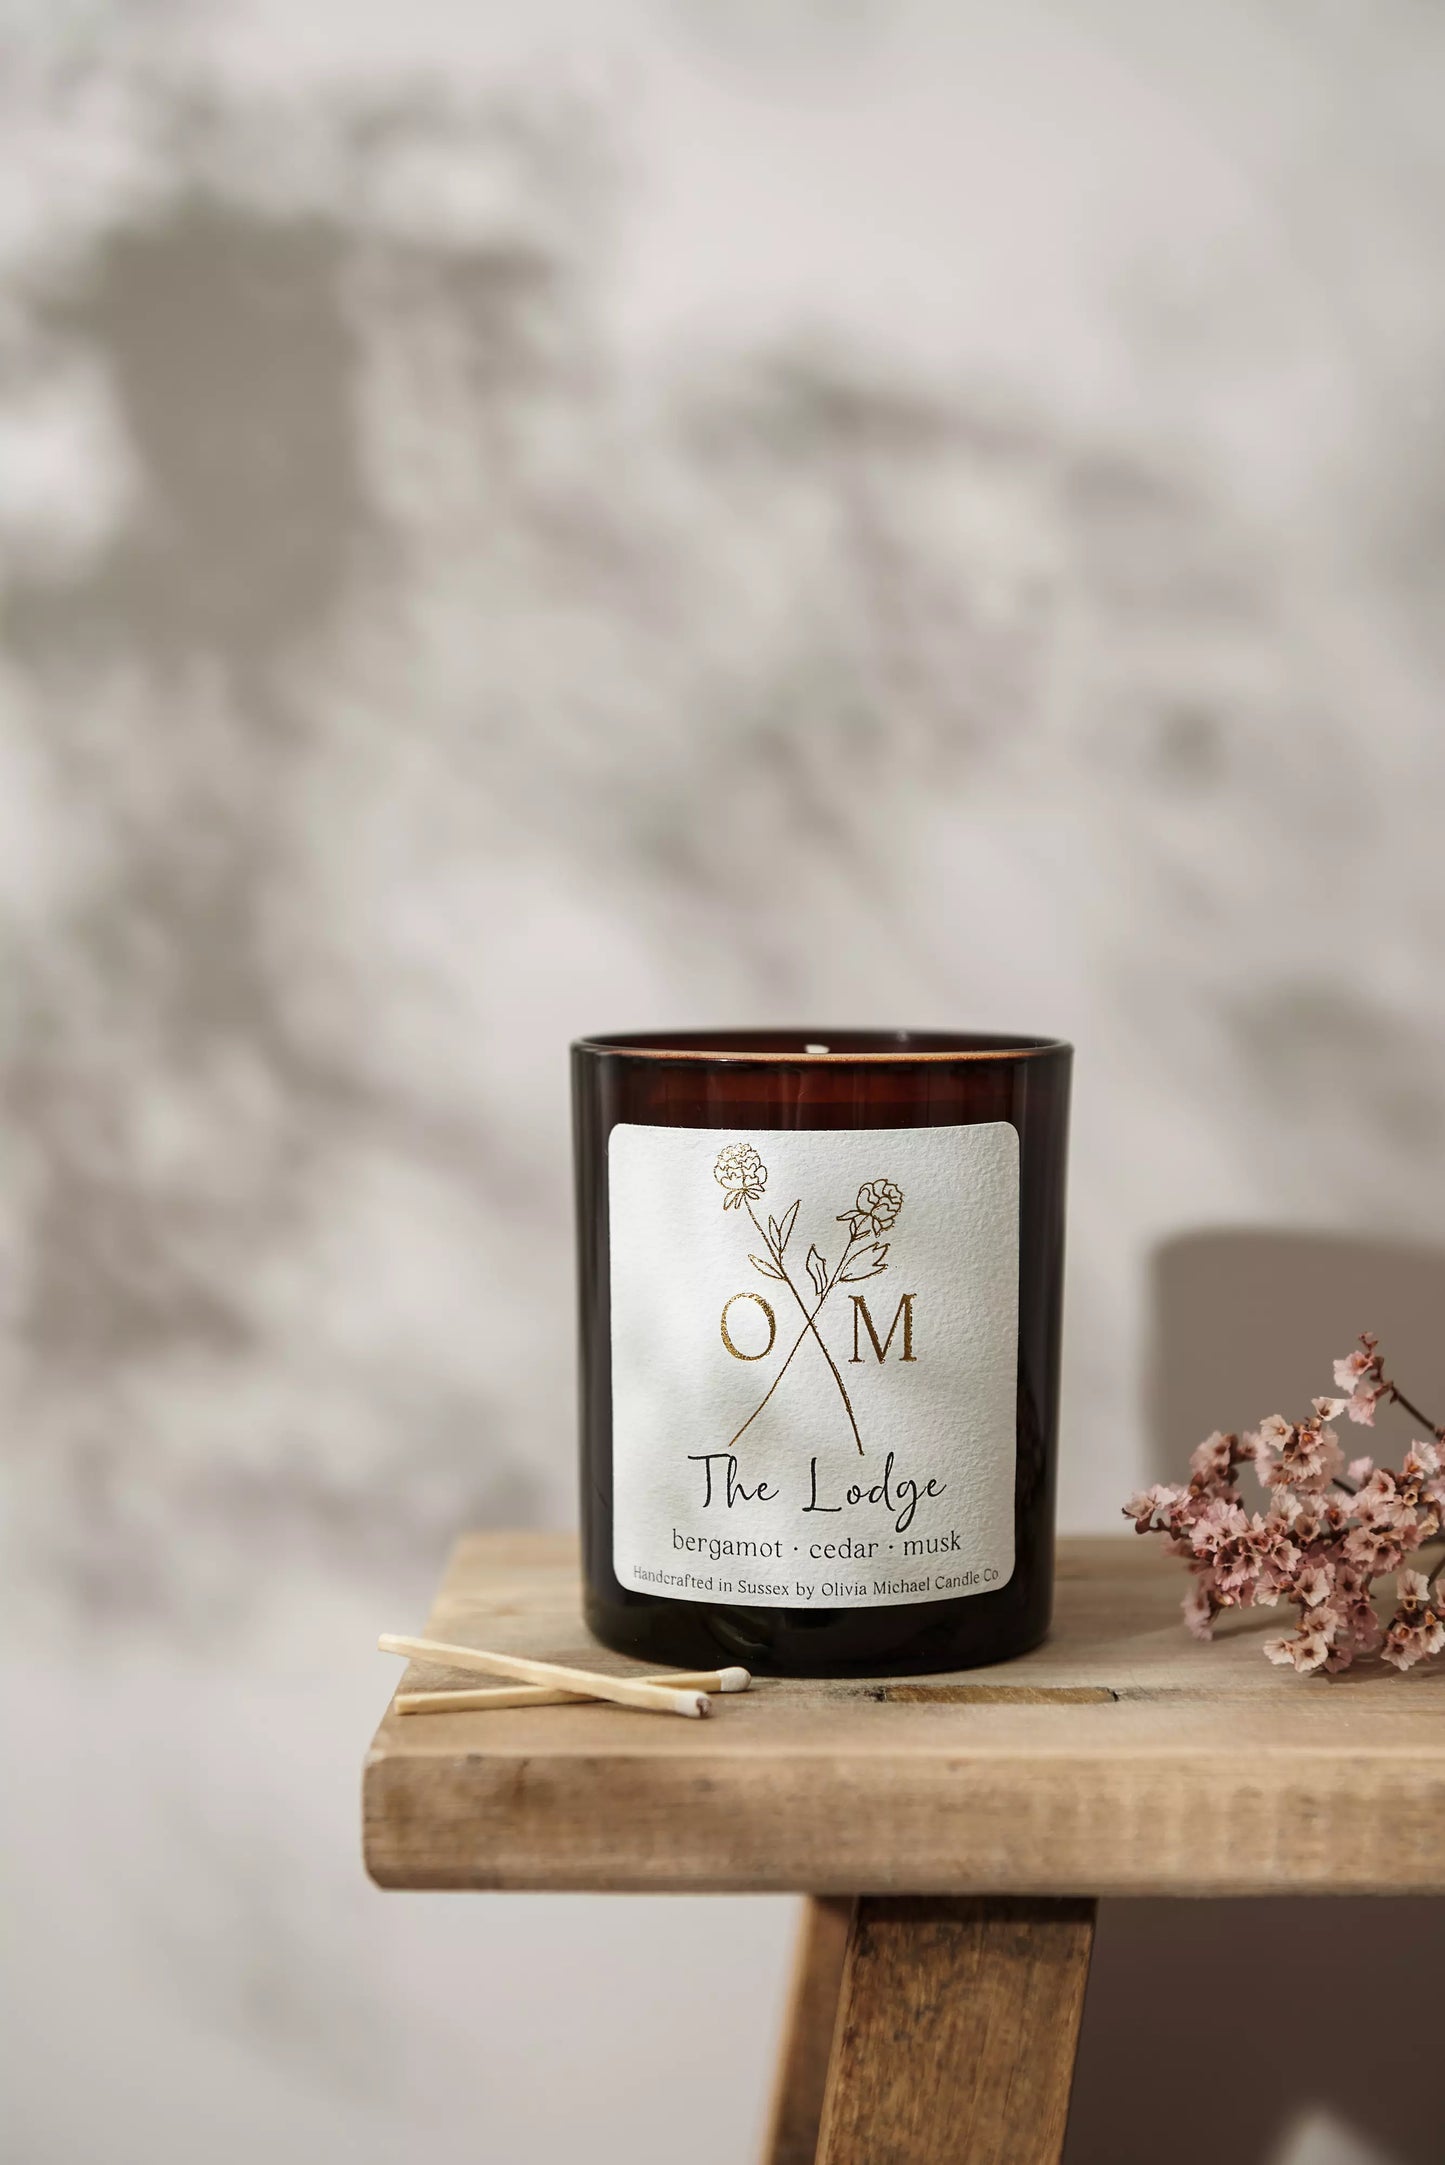 Our bergamot and cedar scented candle is on display in an amber glass jar.